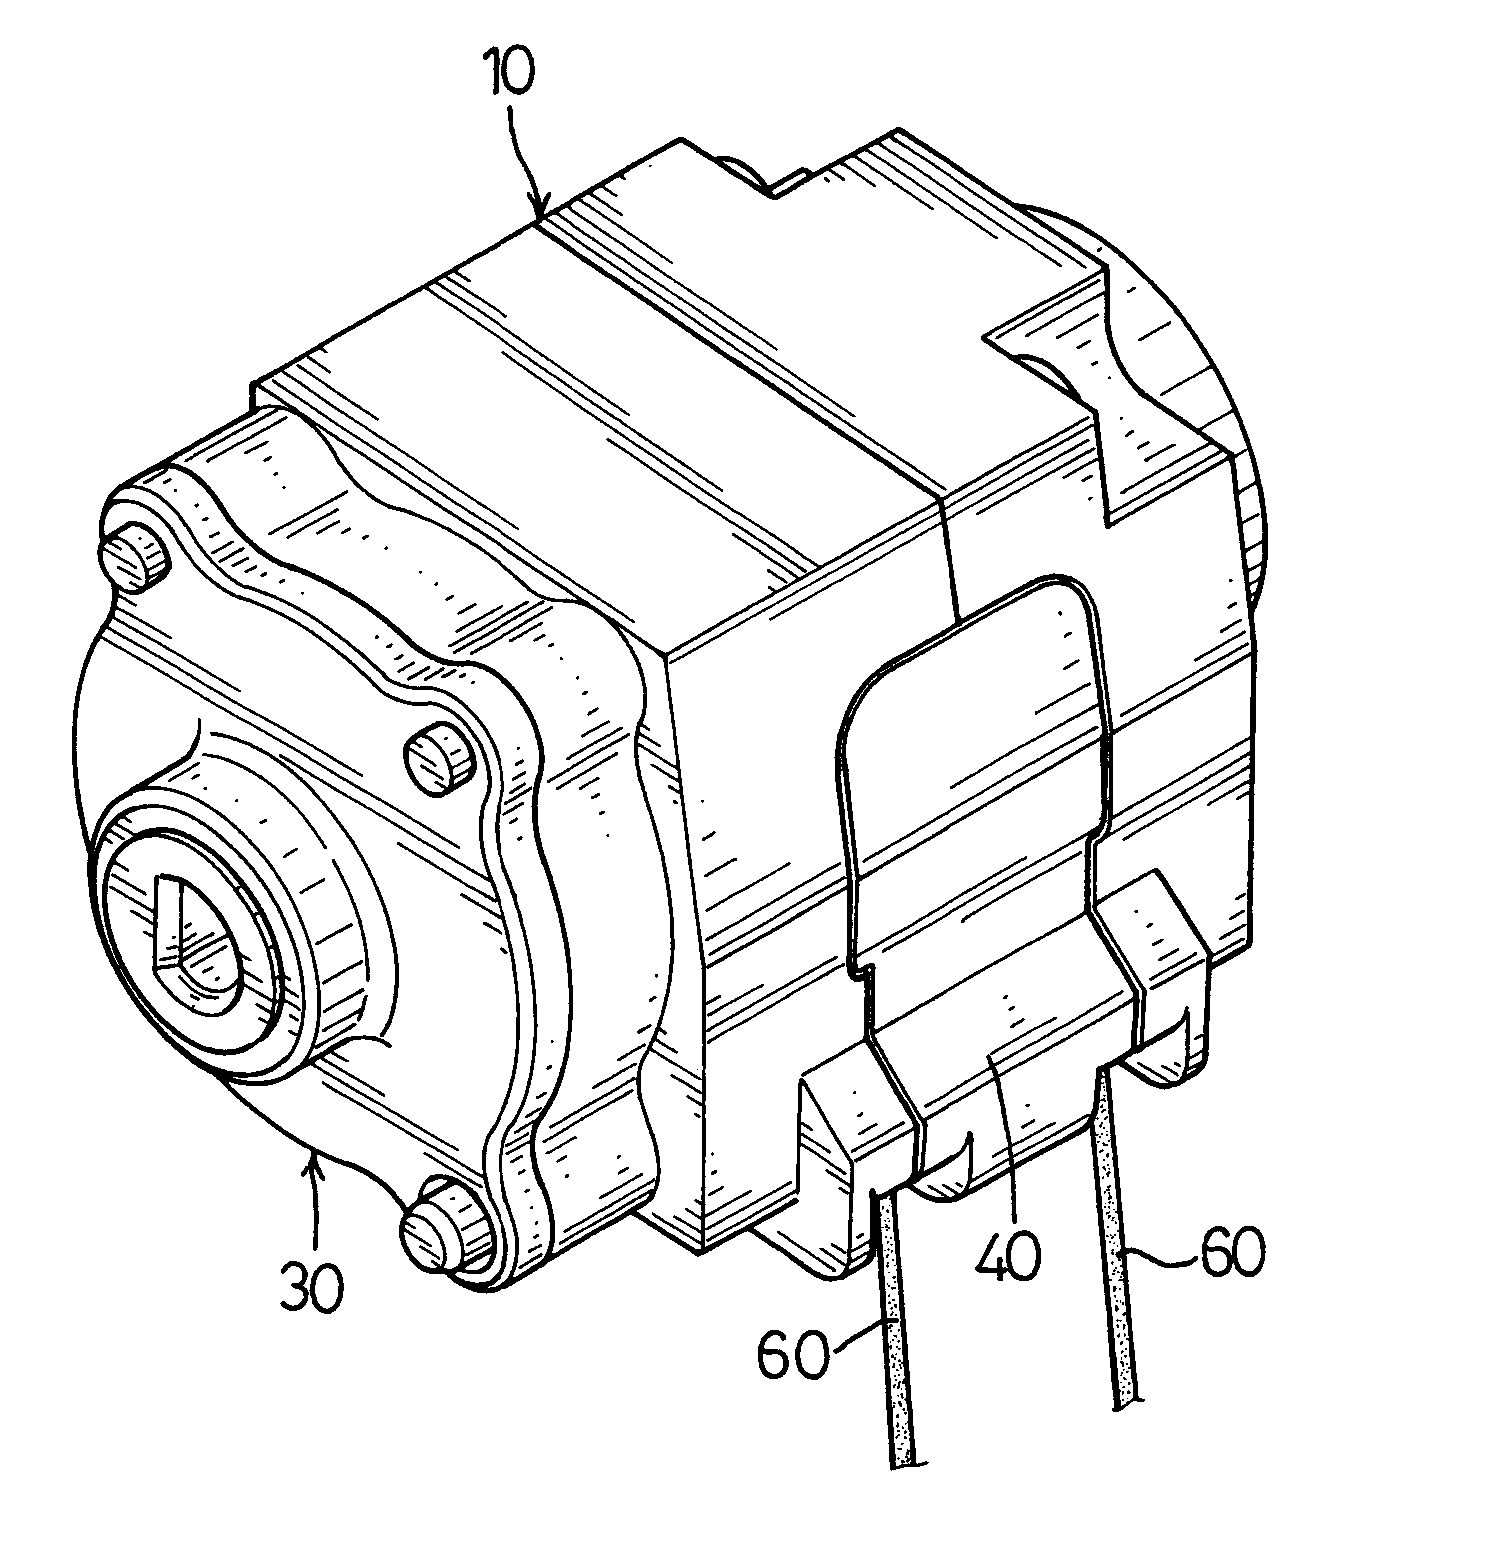 Hypocycloid drive device for adjusting slat angles for a venetian blind